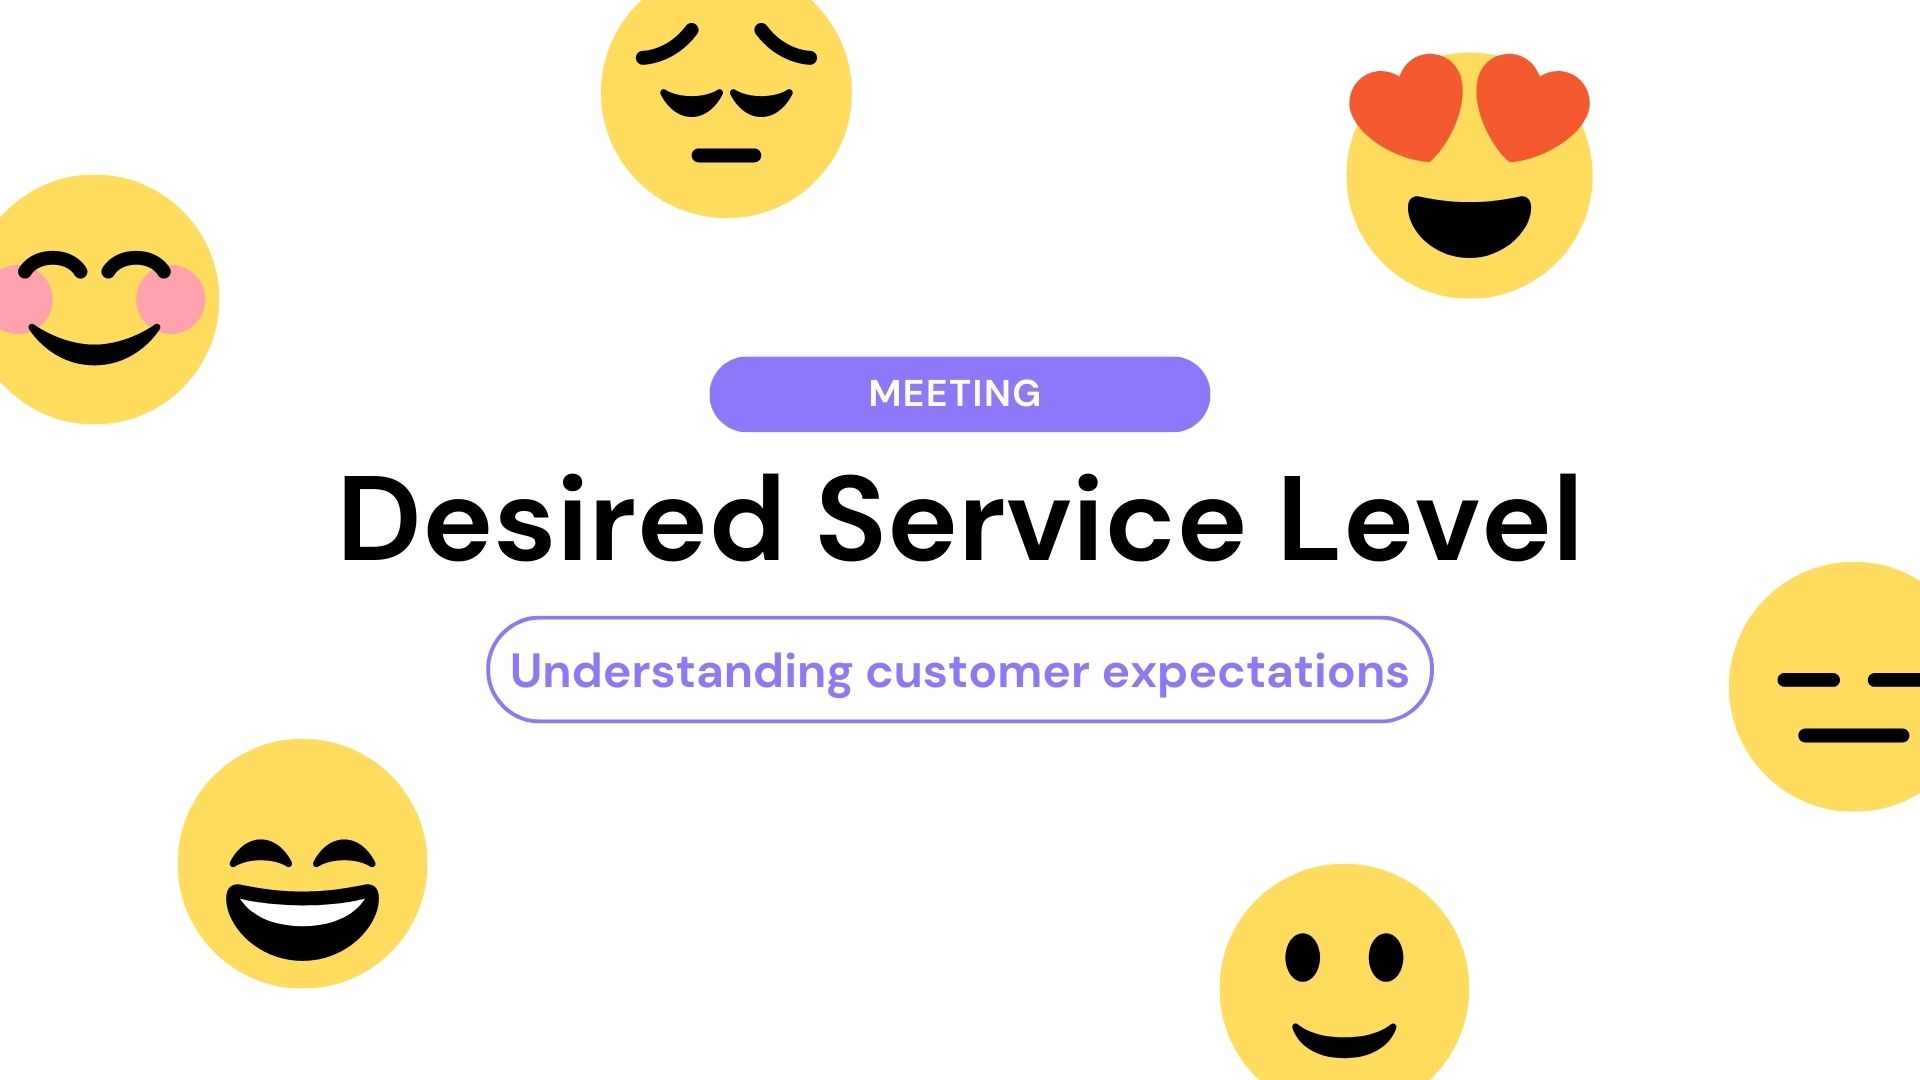 Meeting the Desired Service Level for Business Success